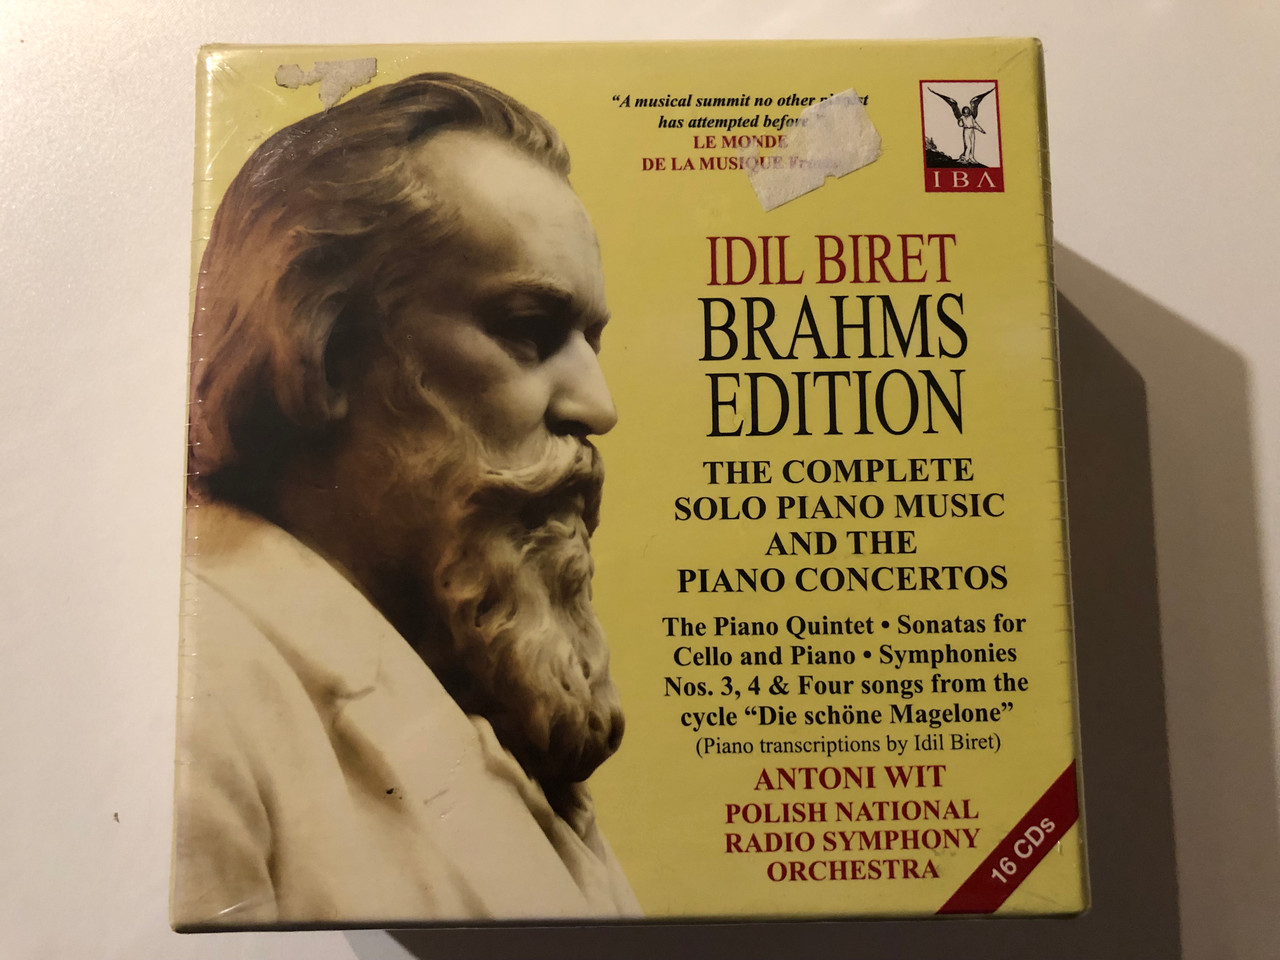 https://cdn10.bigcommerce.com/s-62bdpkt7pb/products/0/images/275463/Idil_Biret_Brahms_Edition_-_The_Complete_Solo_Piano_Music_And_The_Piano_Concertos_The_Piano_Quintet_Sonatas_for_Cello_and_Piano_Symphonies_Nos._3_4_Four_songs_from_the_cycle_Die_schon_1__81440.1685125139.1280.1280.JPG?c=2&_gl=1*1c9aw0k*_ga*MjA2NTIxMjE2MC4xNTkwNTEyNTMy*_ga_WS2VZYPC6G*MTY4NTEyMzg3Ny45MTMuMS4xNjg1MTI0NzgwLjU3LjAuMA..